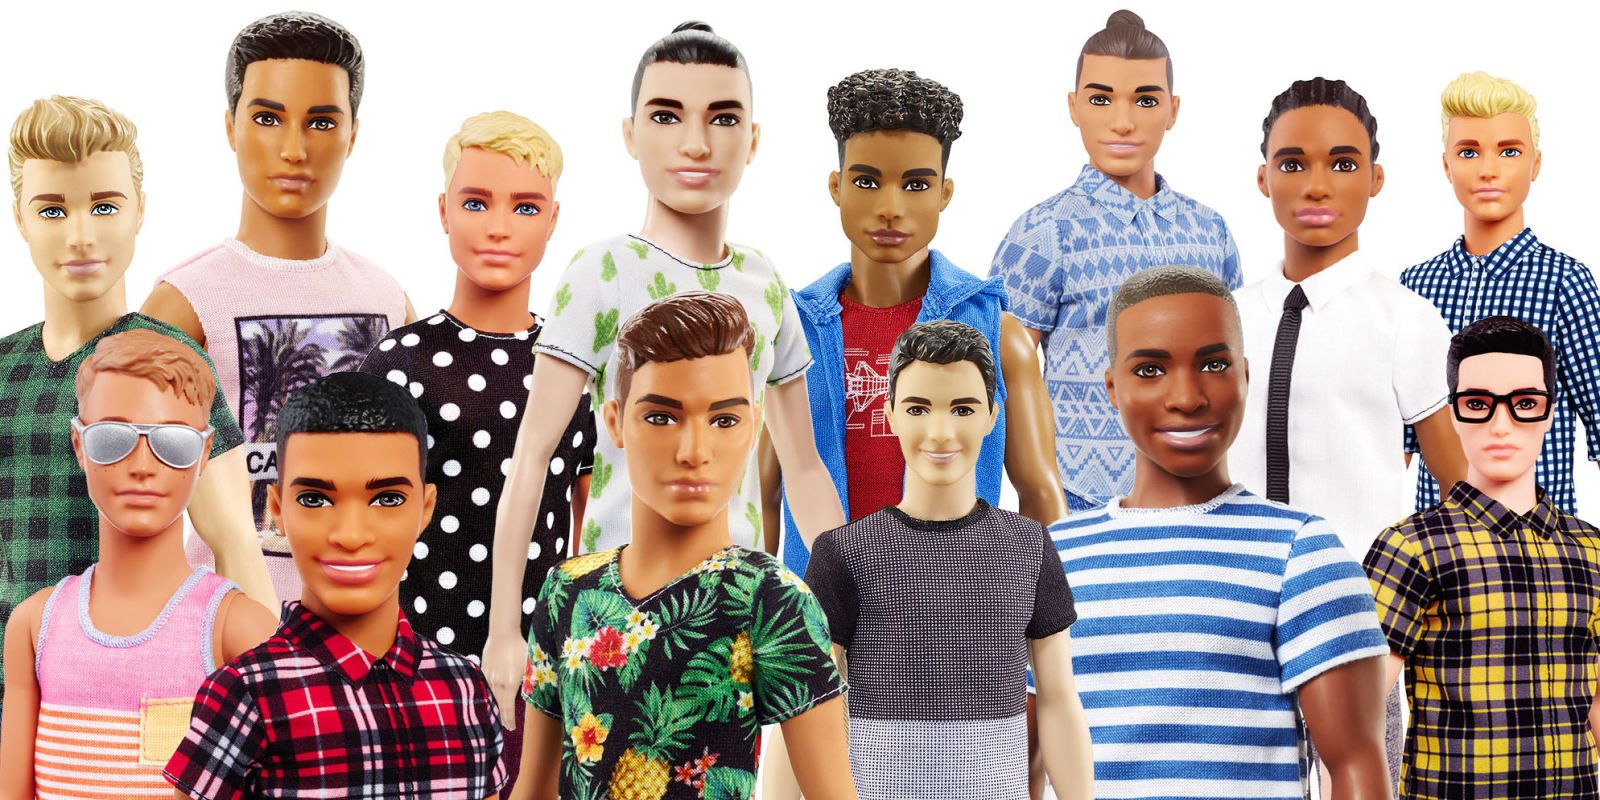 Meet the 15 Kens in Mattel's New Doll Line. 